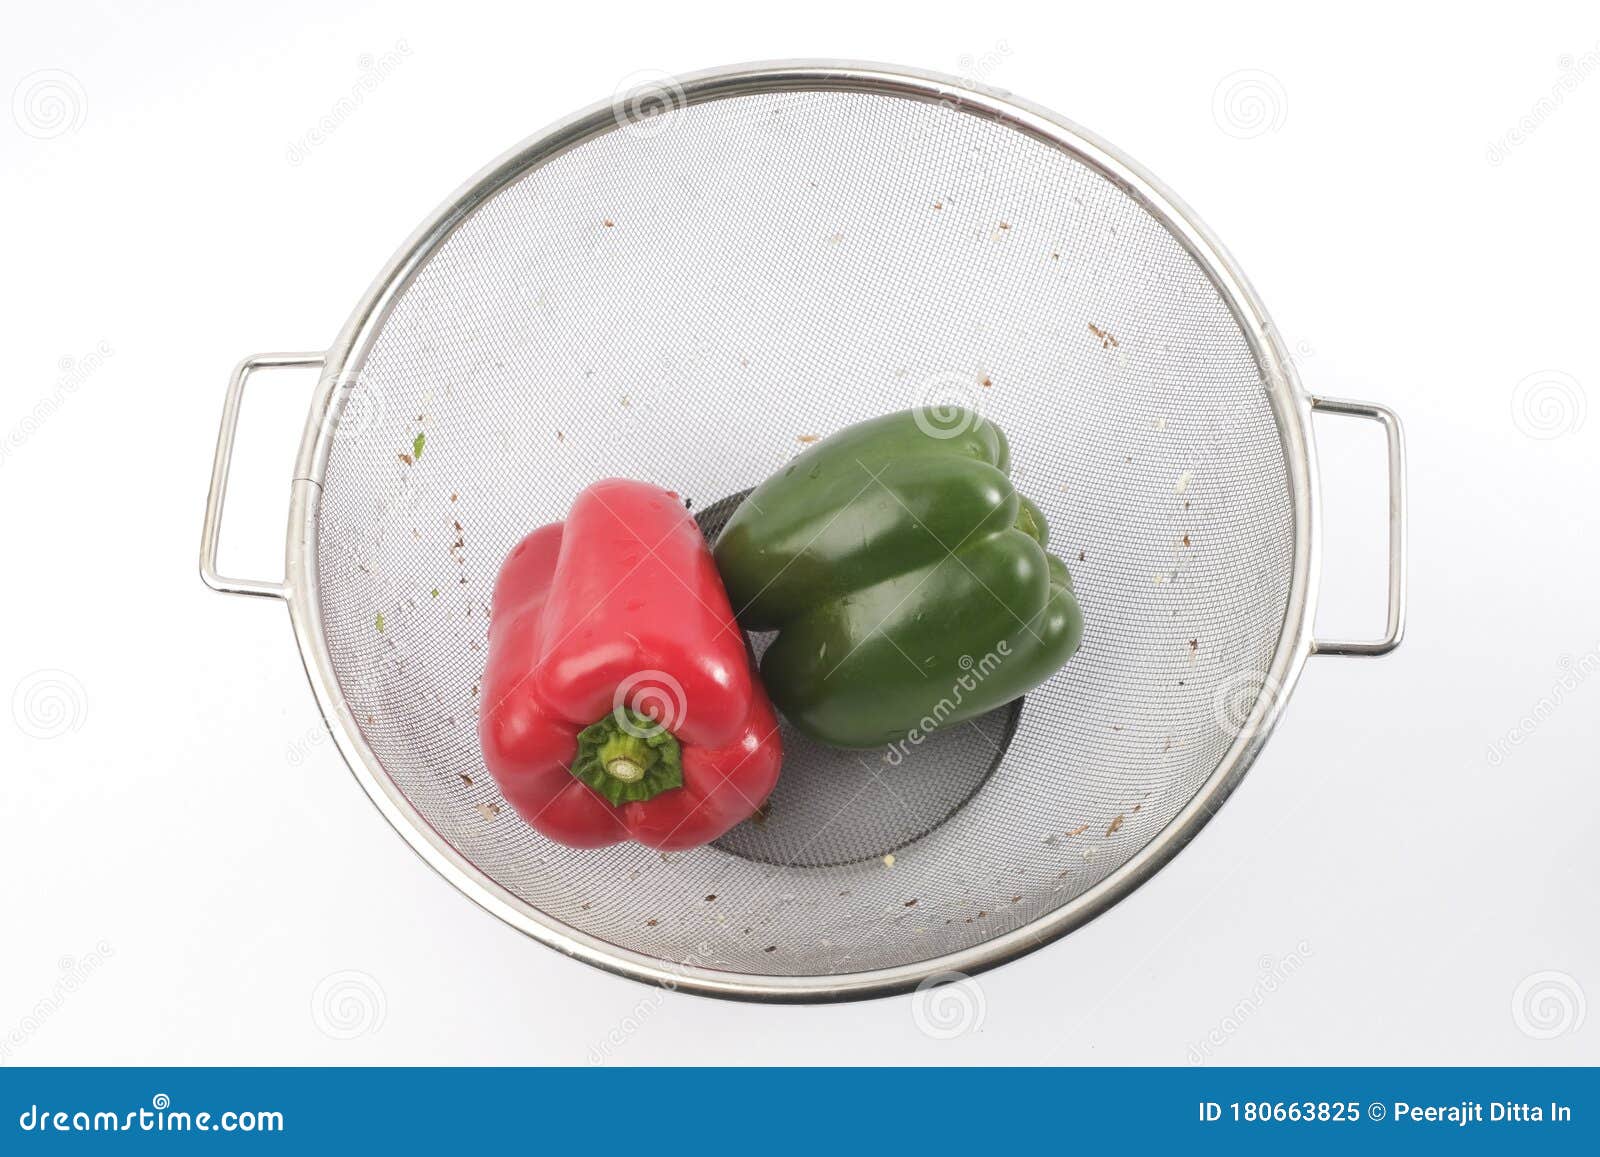 Green and Red Bell Pepper with Sieve Water Filter Stock Image - Image of  filter, sieve: 180663825